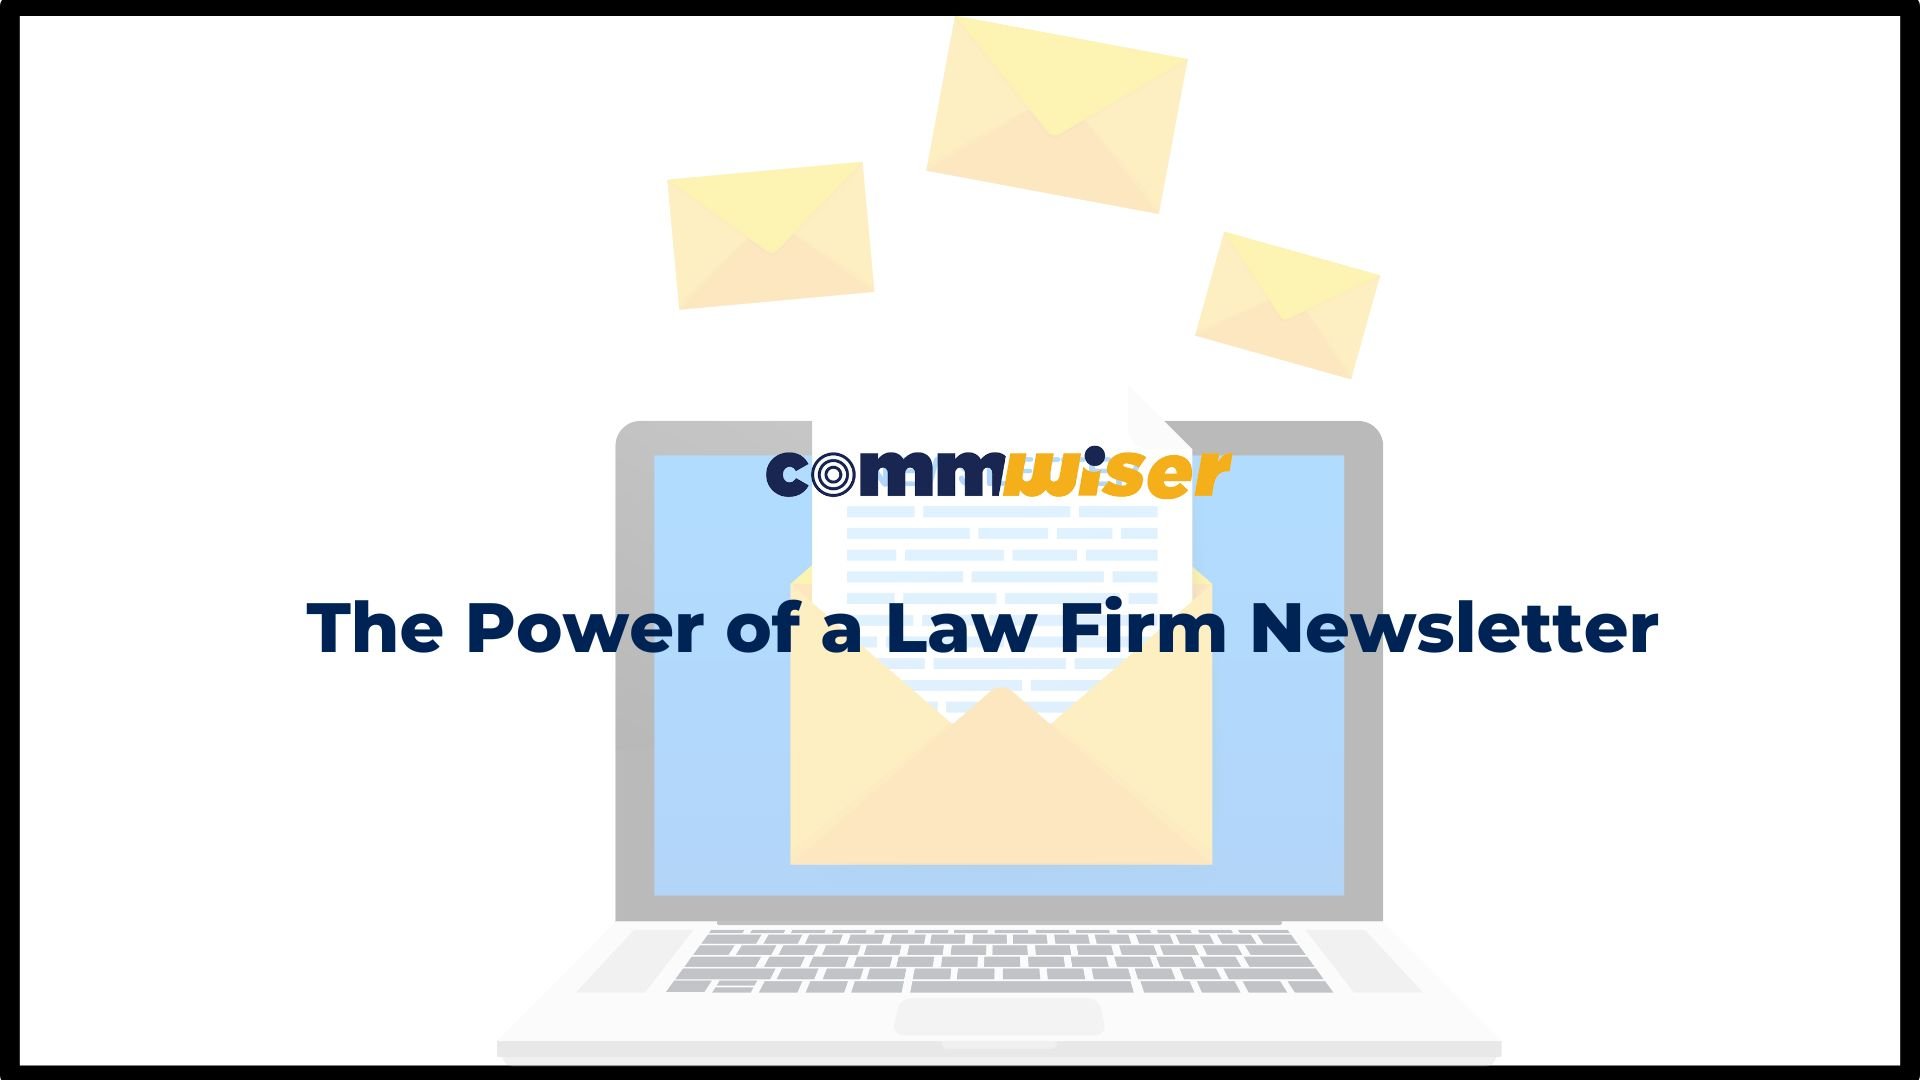 The Power of a Law Firm Newsletter